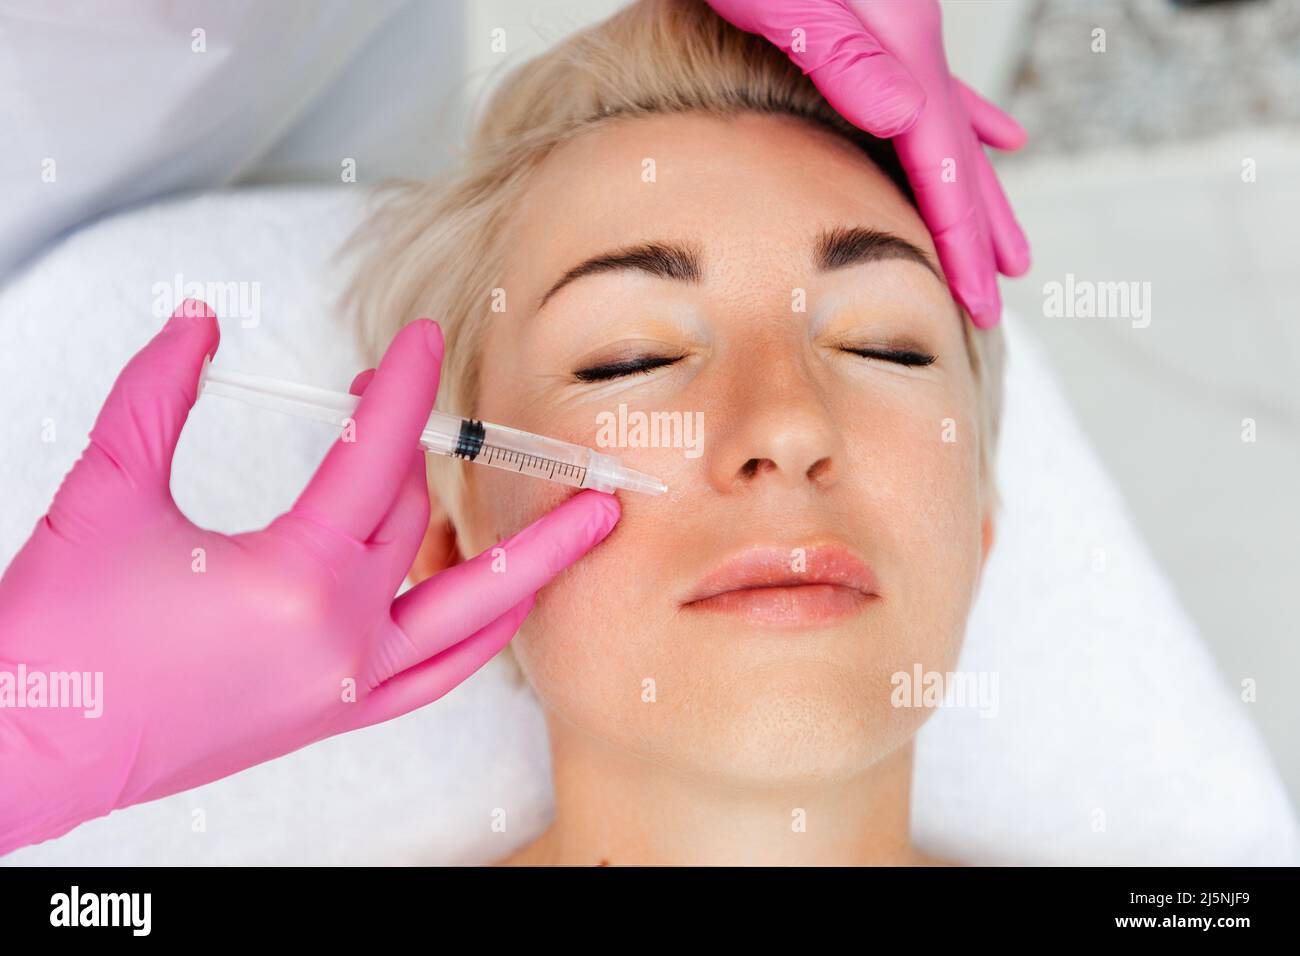 Professional cosmetology. Close-up portrait of beautiful adult woman getting injection in the cosmetology salon. Doctor in medical gloves with syringe Stock Photo